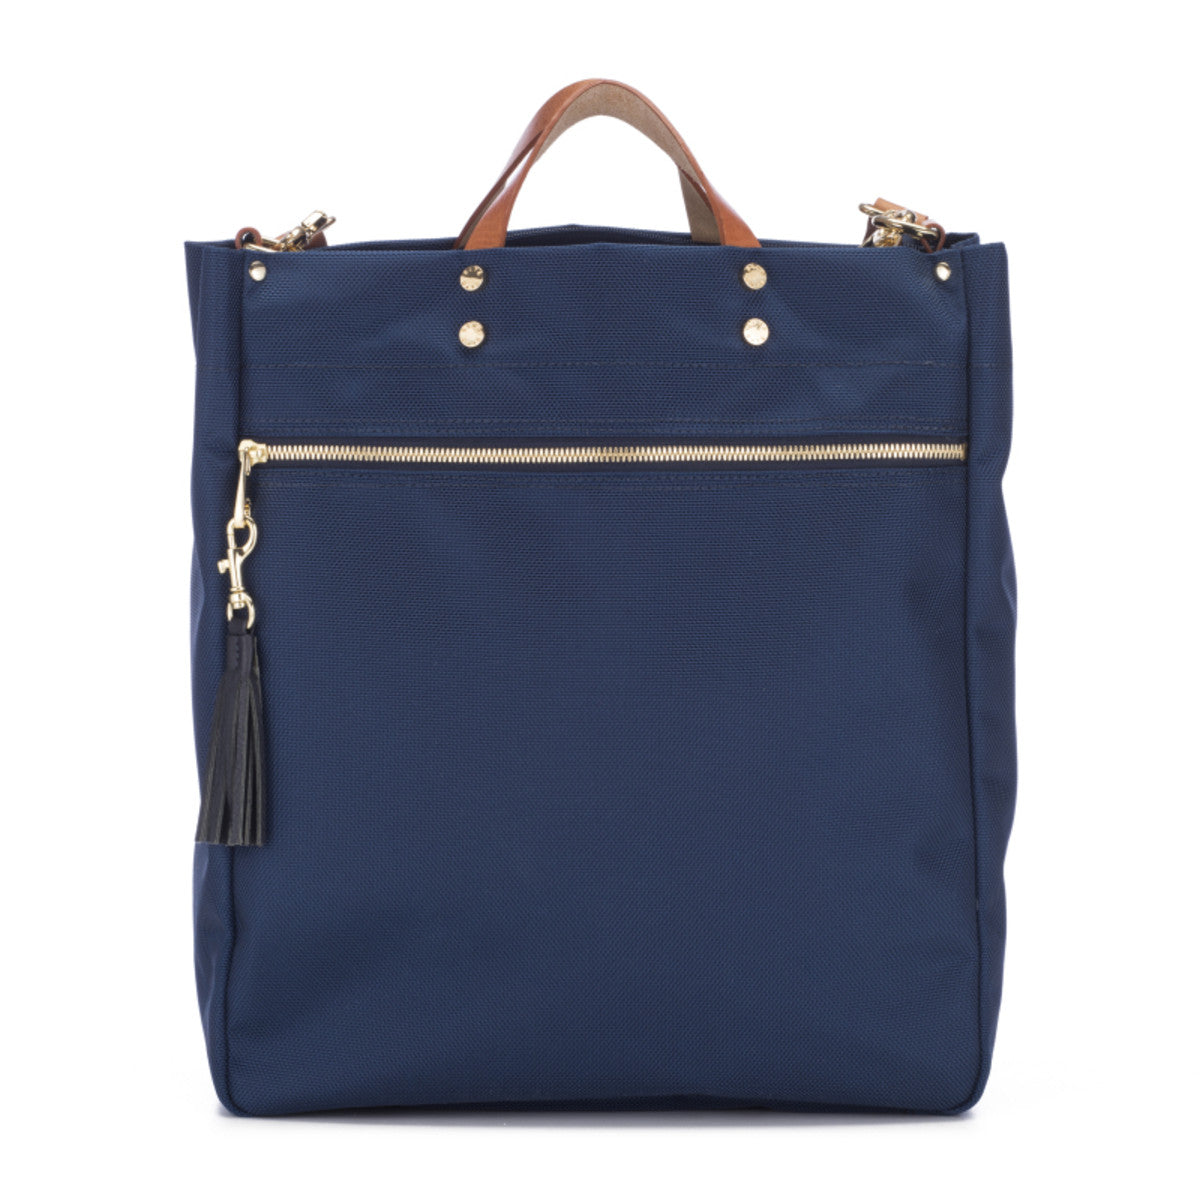 Parker Tote - Molly + Kate 